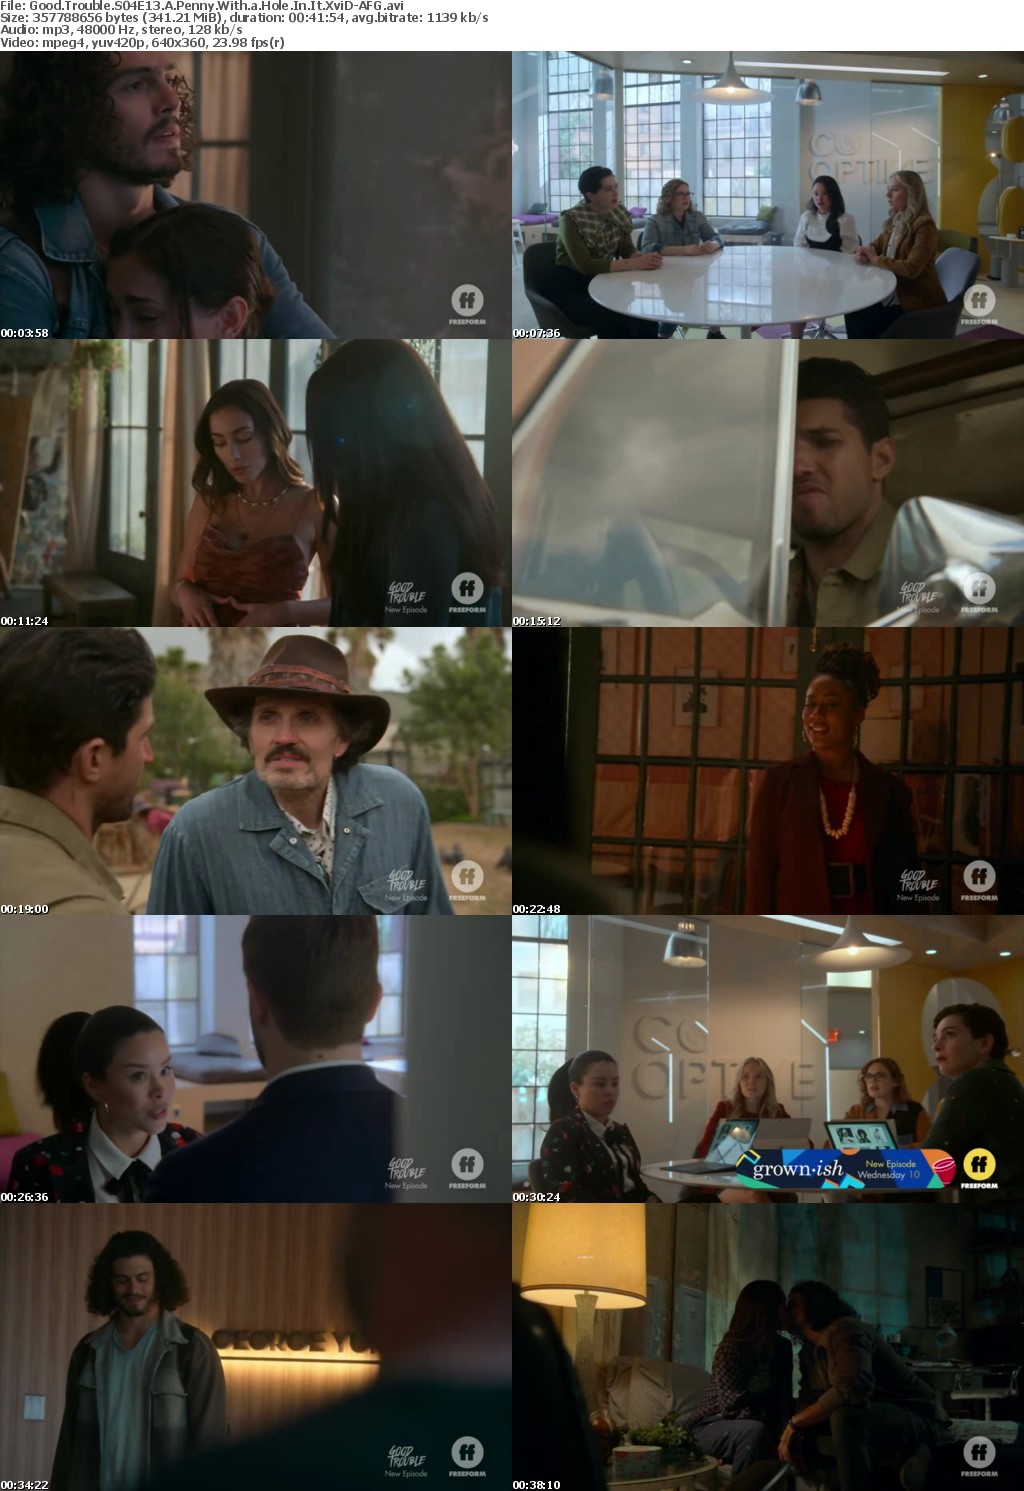 Good Trouble S04E13 A Penny With a Hole In It XviD-AFG